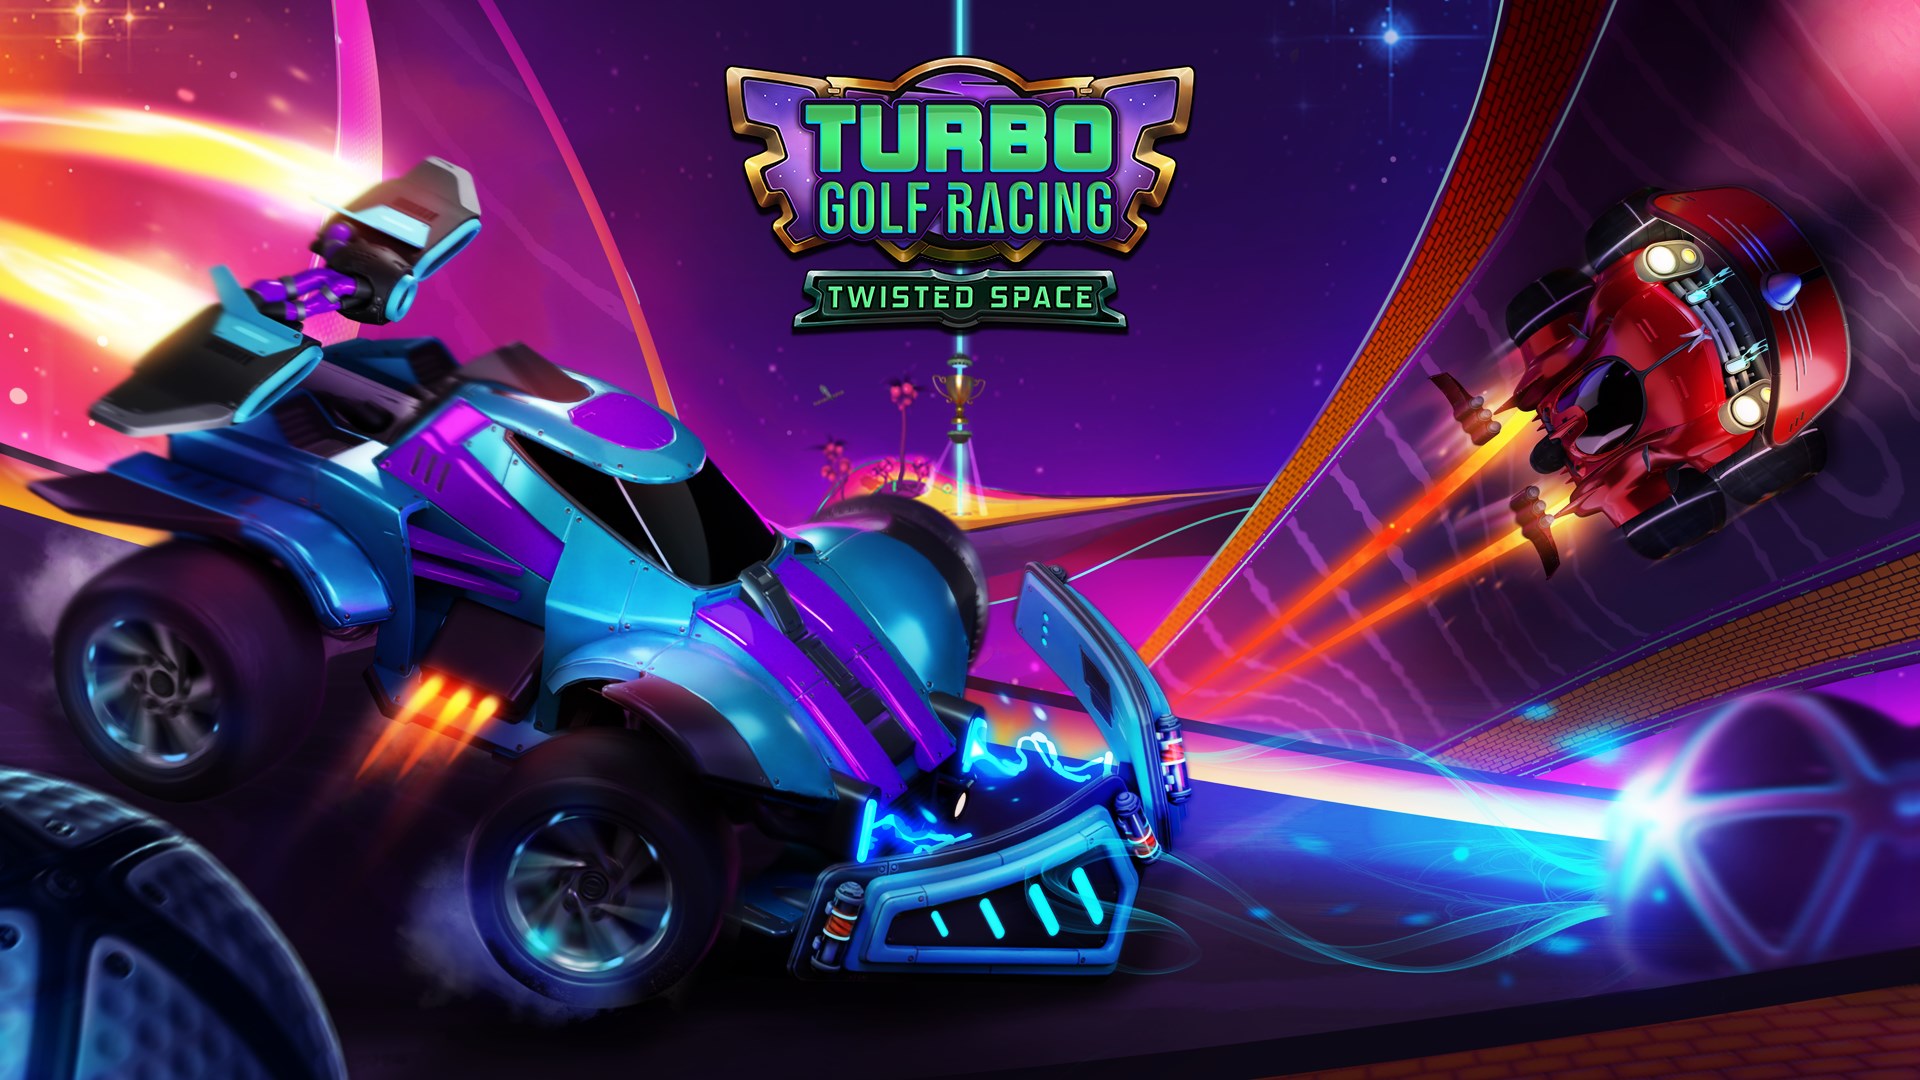 spil-turbo-golf-racing-game-preview-xbox-cloud-gaming-beta-p